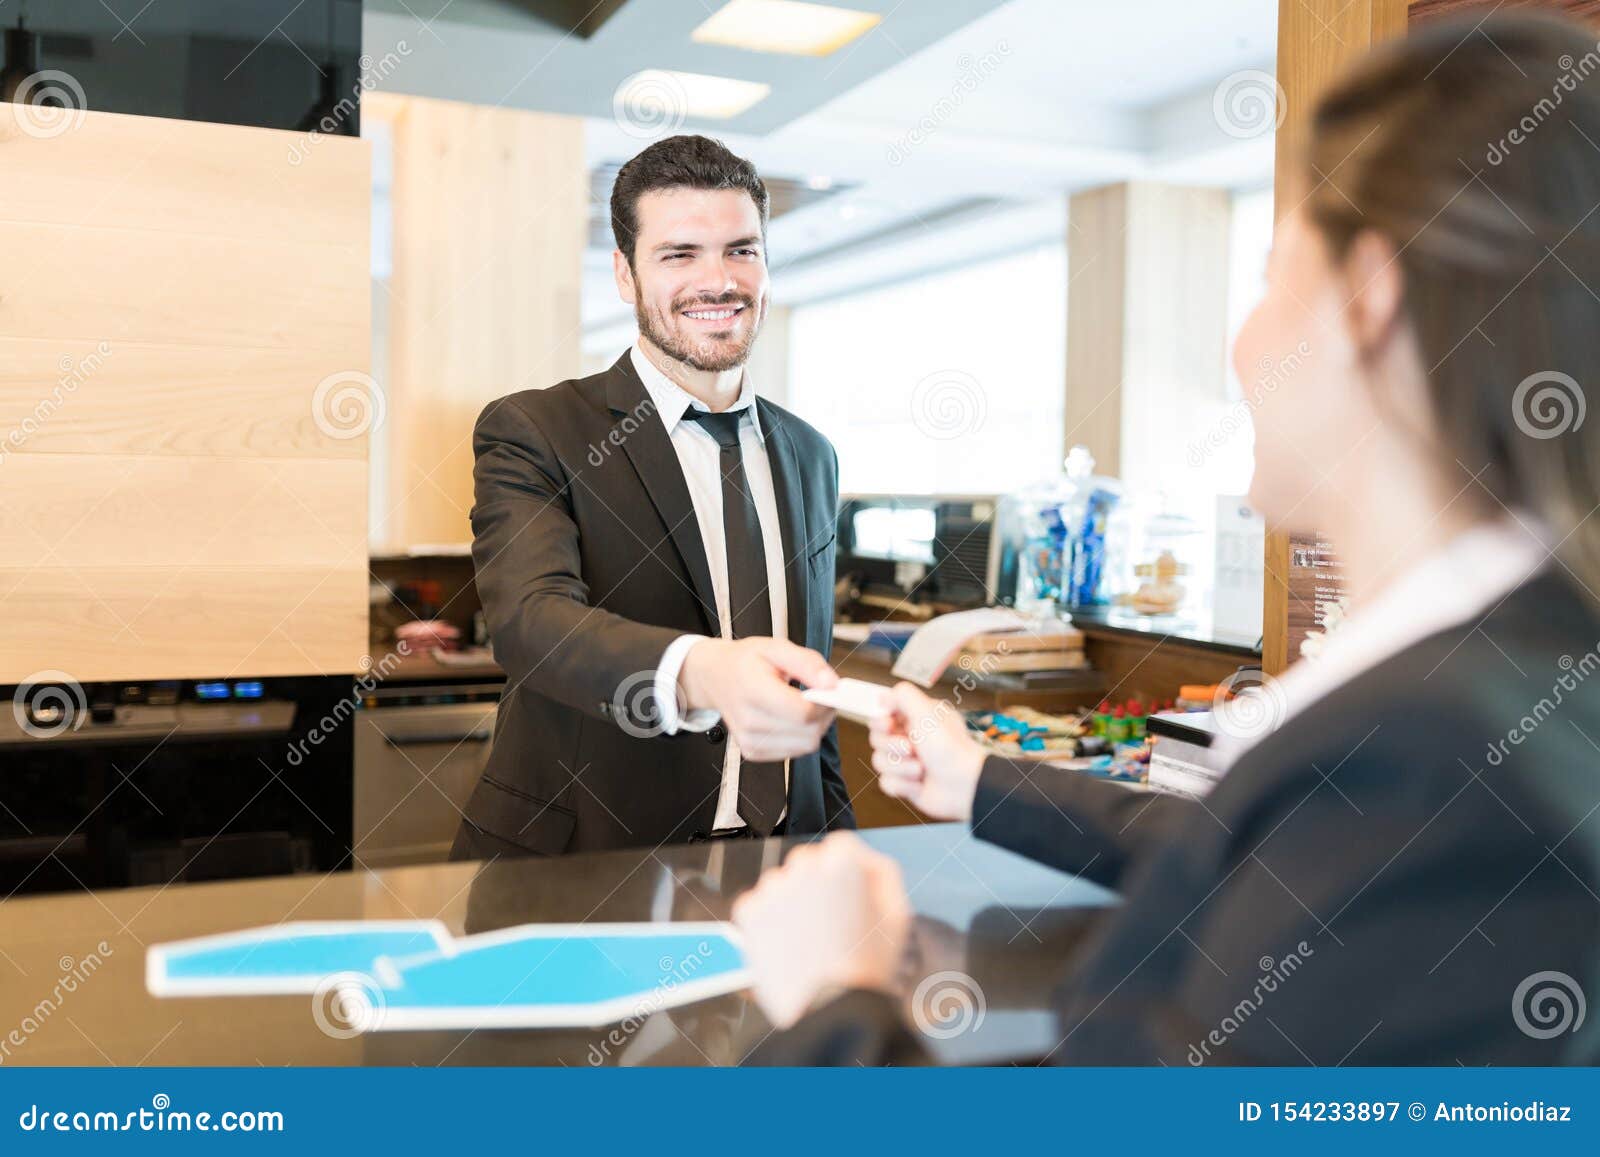 Businesswoman Paying Through Card At Front Desk In Hotel Stock